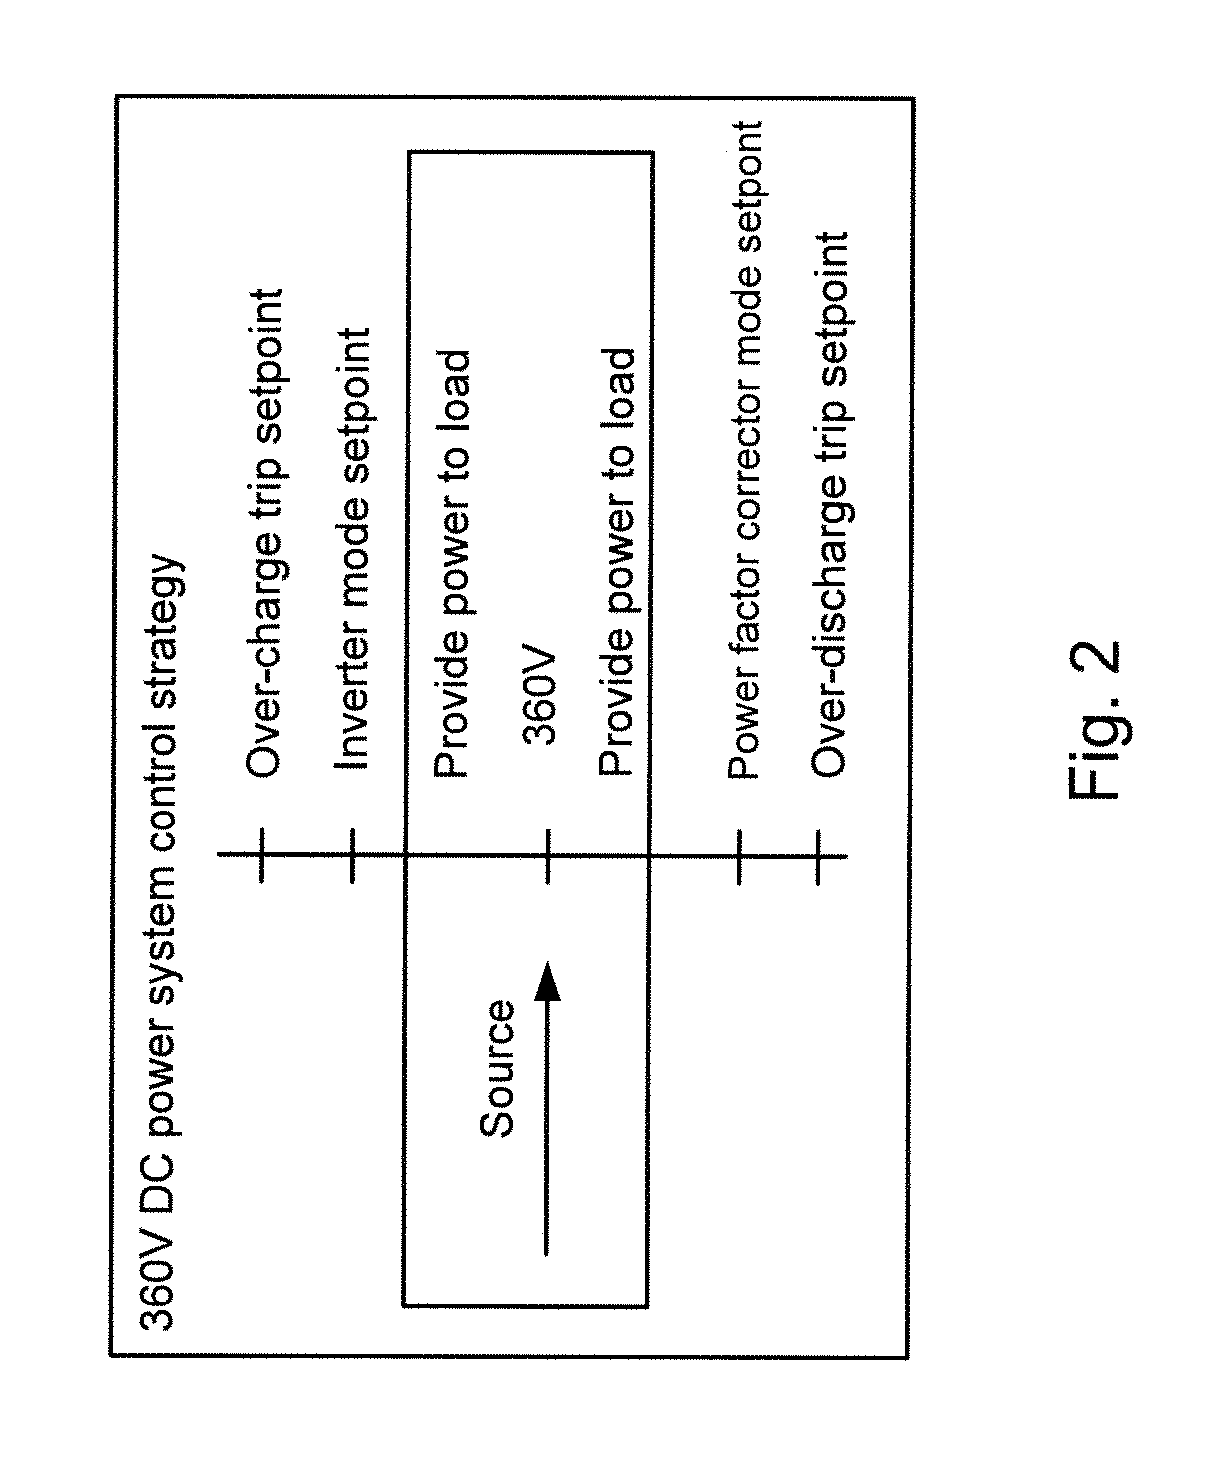 DC Power System for Household Appliances